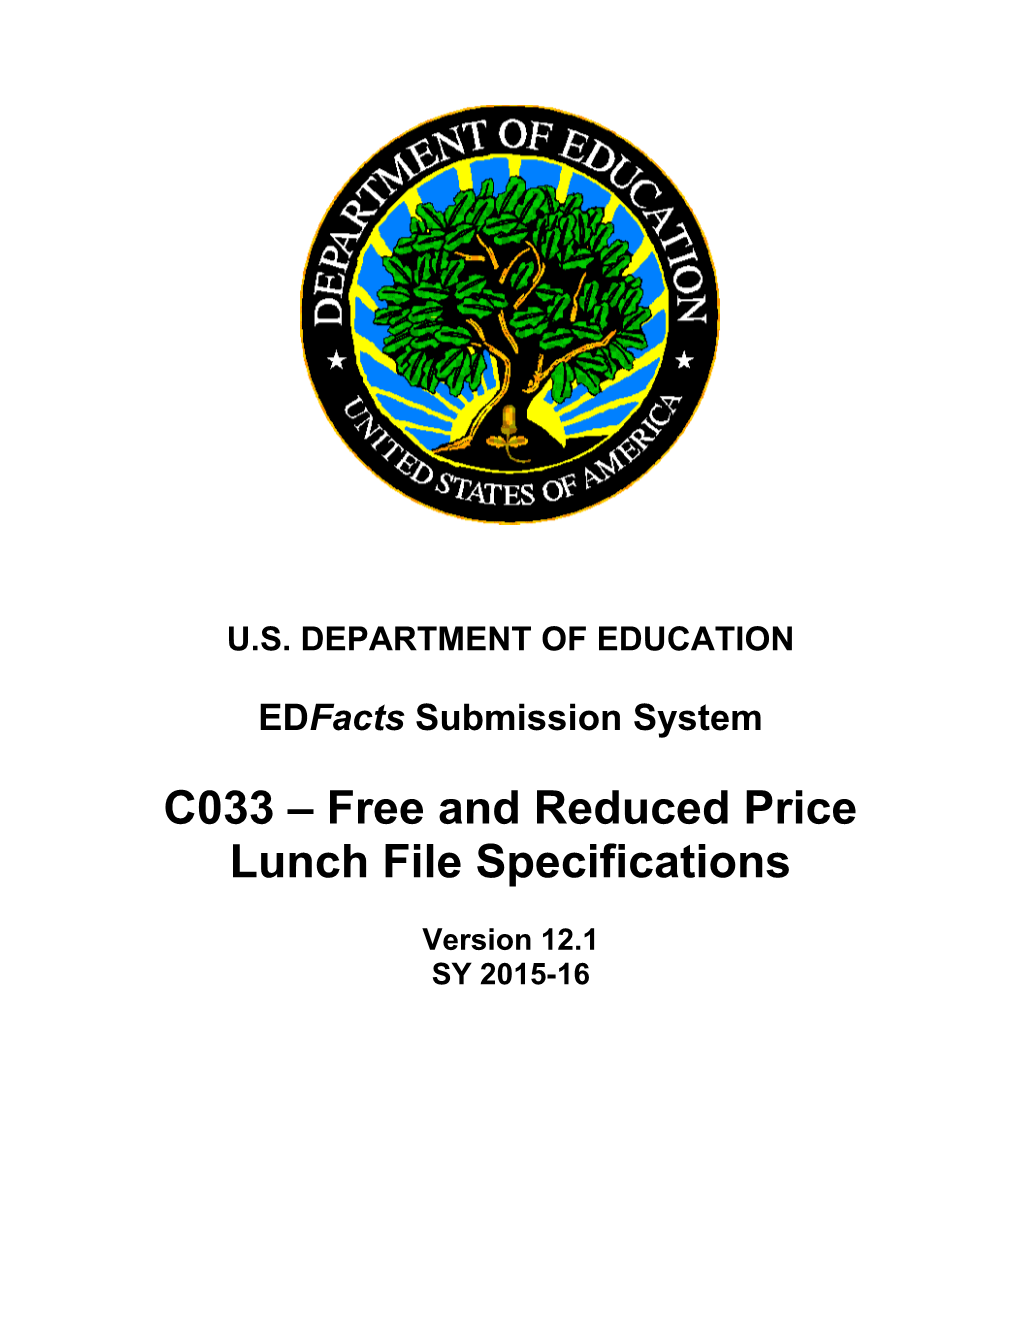 Free Reduced Price Lunch File Specifications